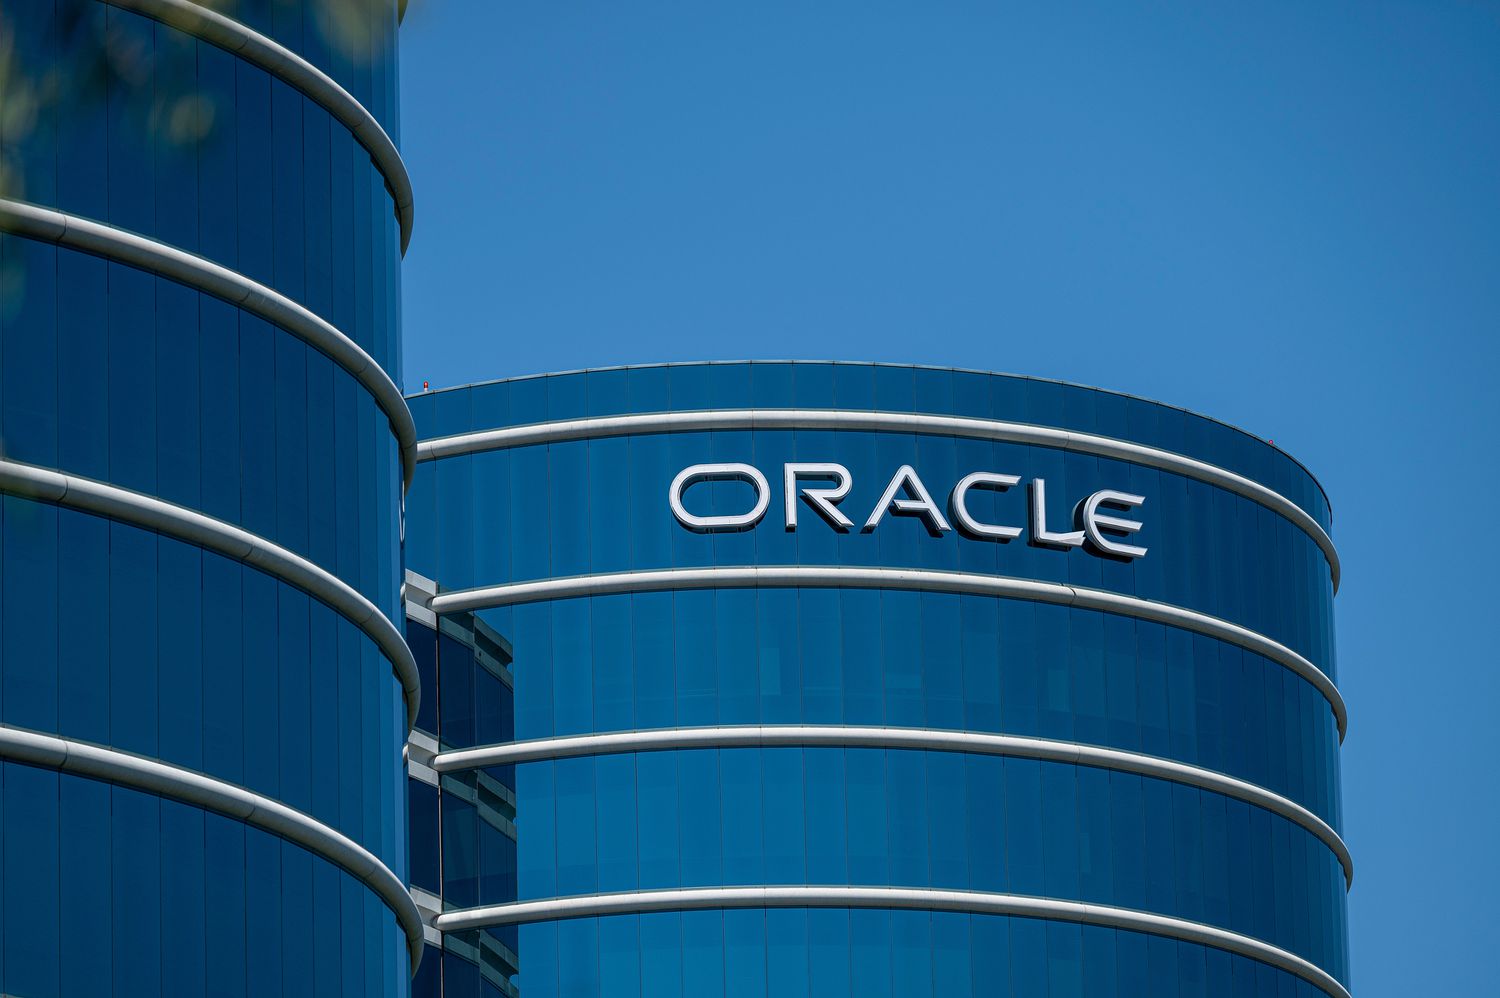 What You Need To Know Ahead of Oracle’s Earnings Report Monday [Video]